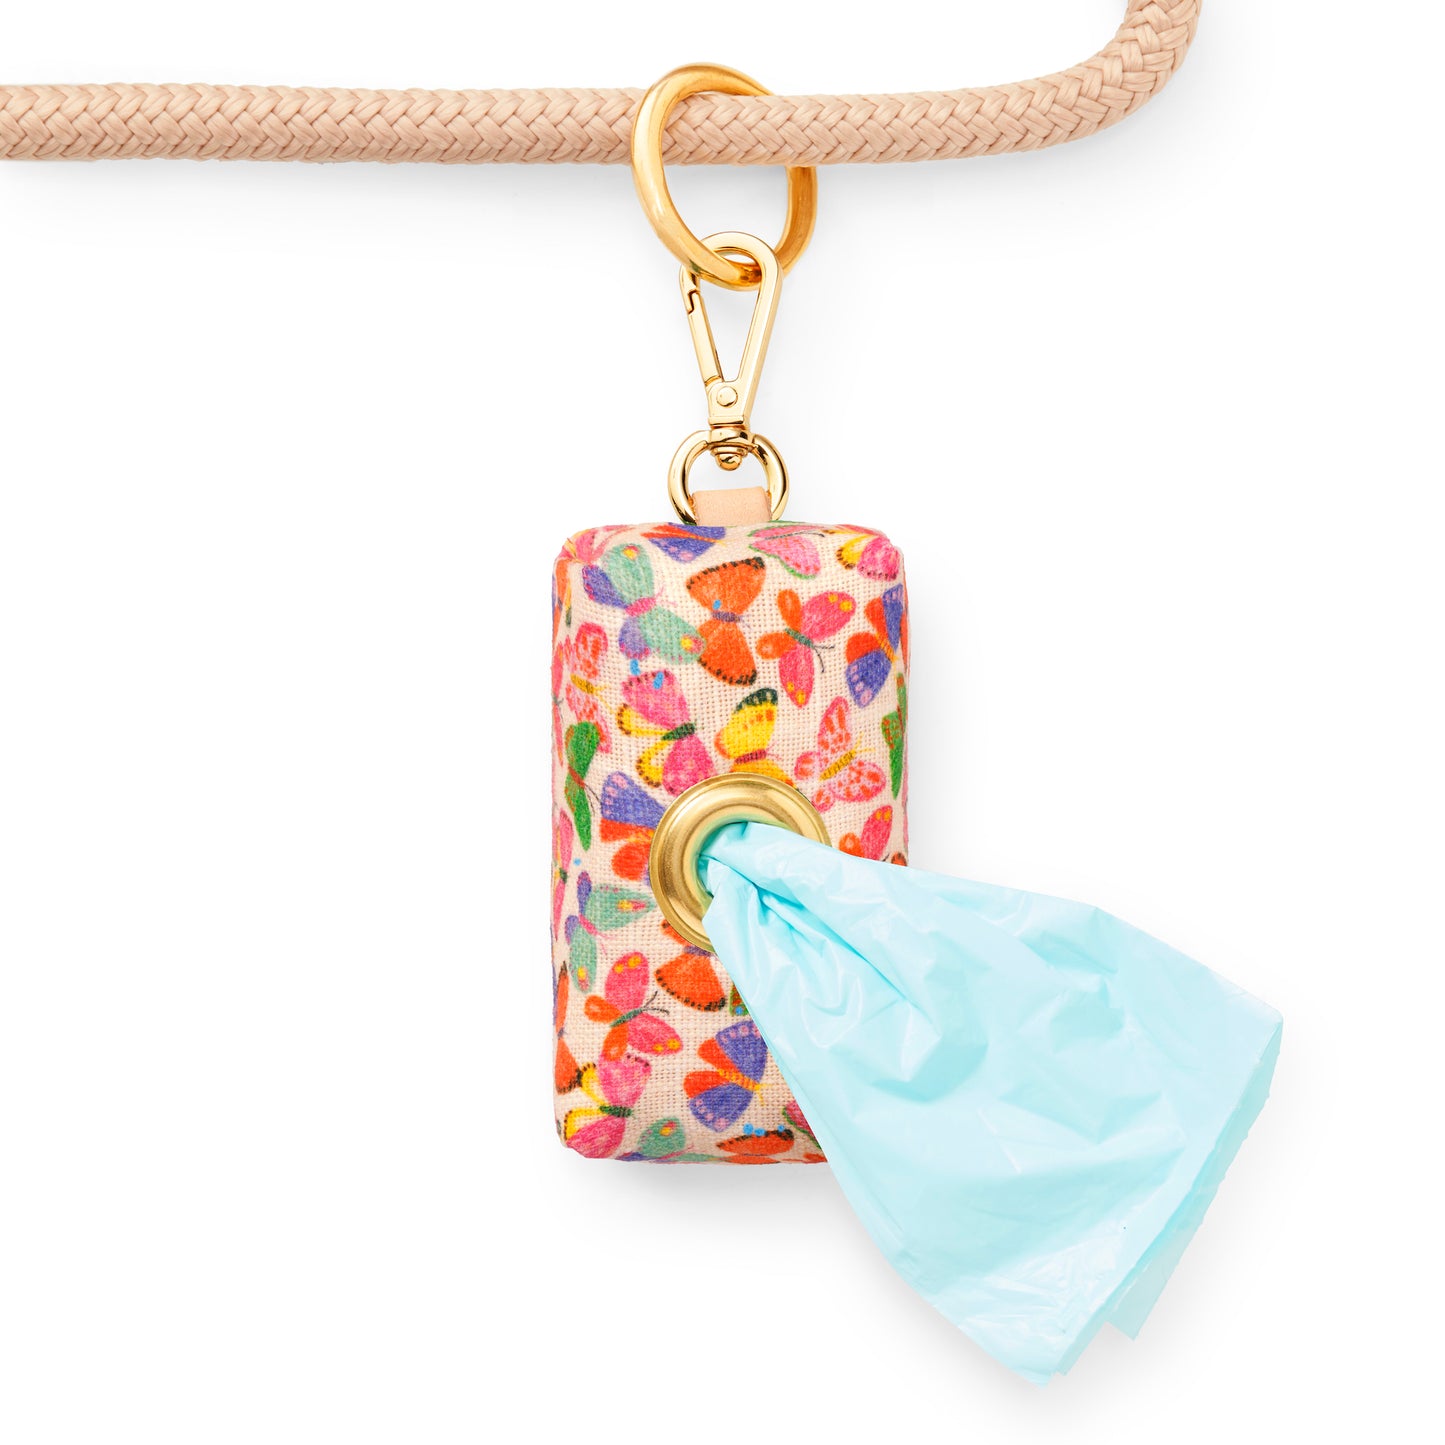 Bright Butterflies Waste Bag Dispenser from The Foggy Dog